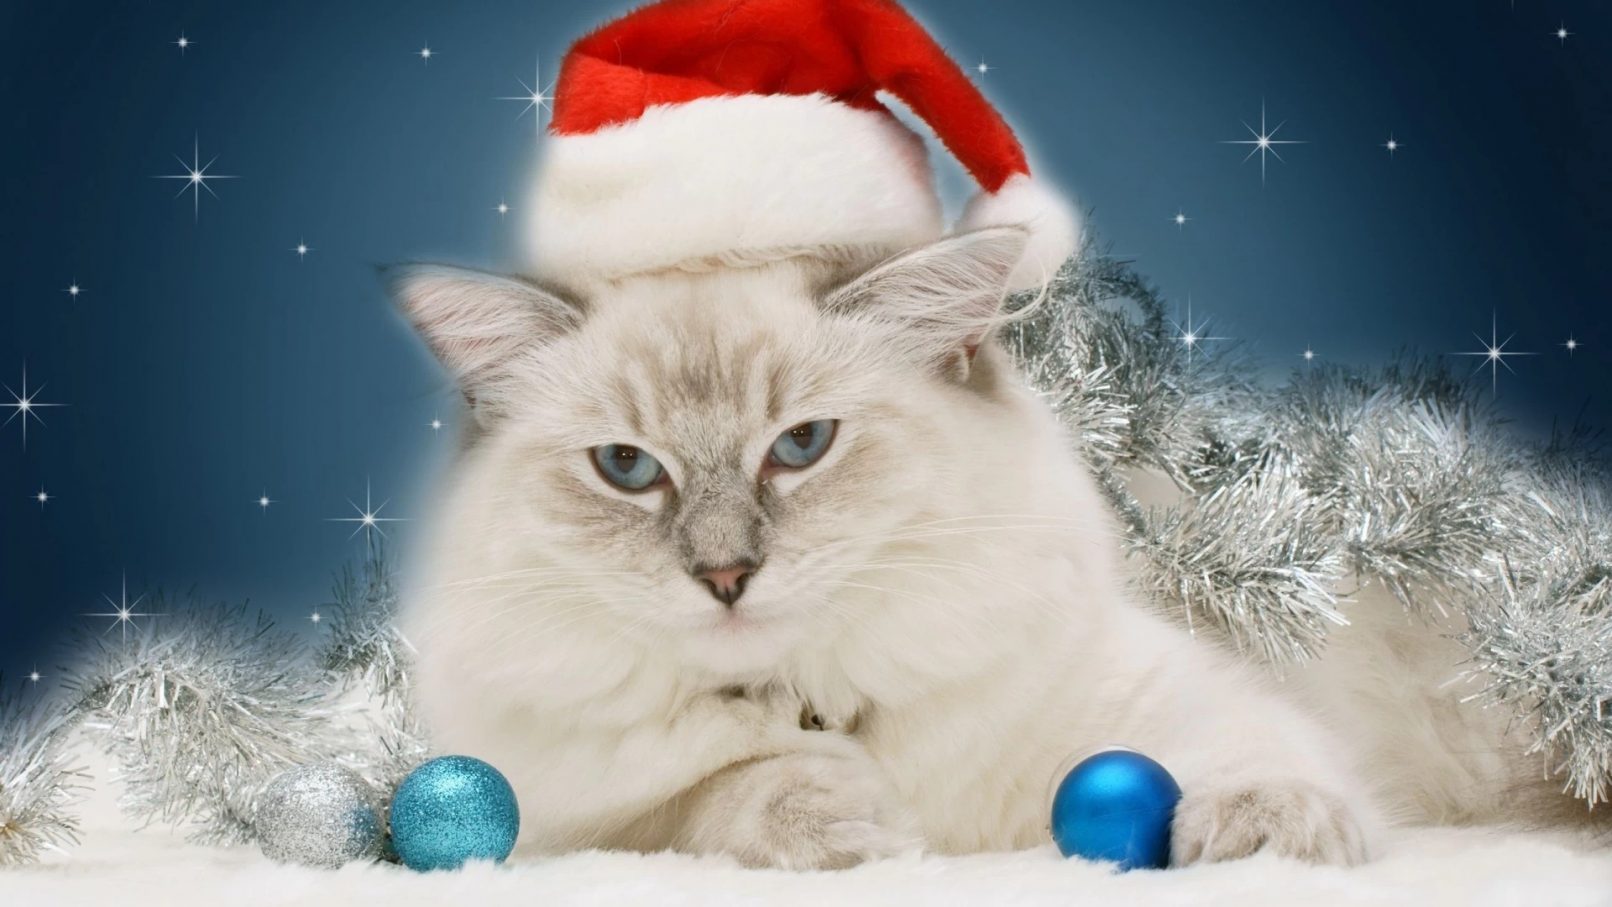 free cool Christmas Kittens and Puppies chrome extension HD wallpaper theme tab for chrome browser!